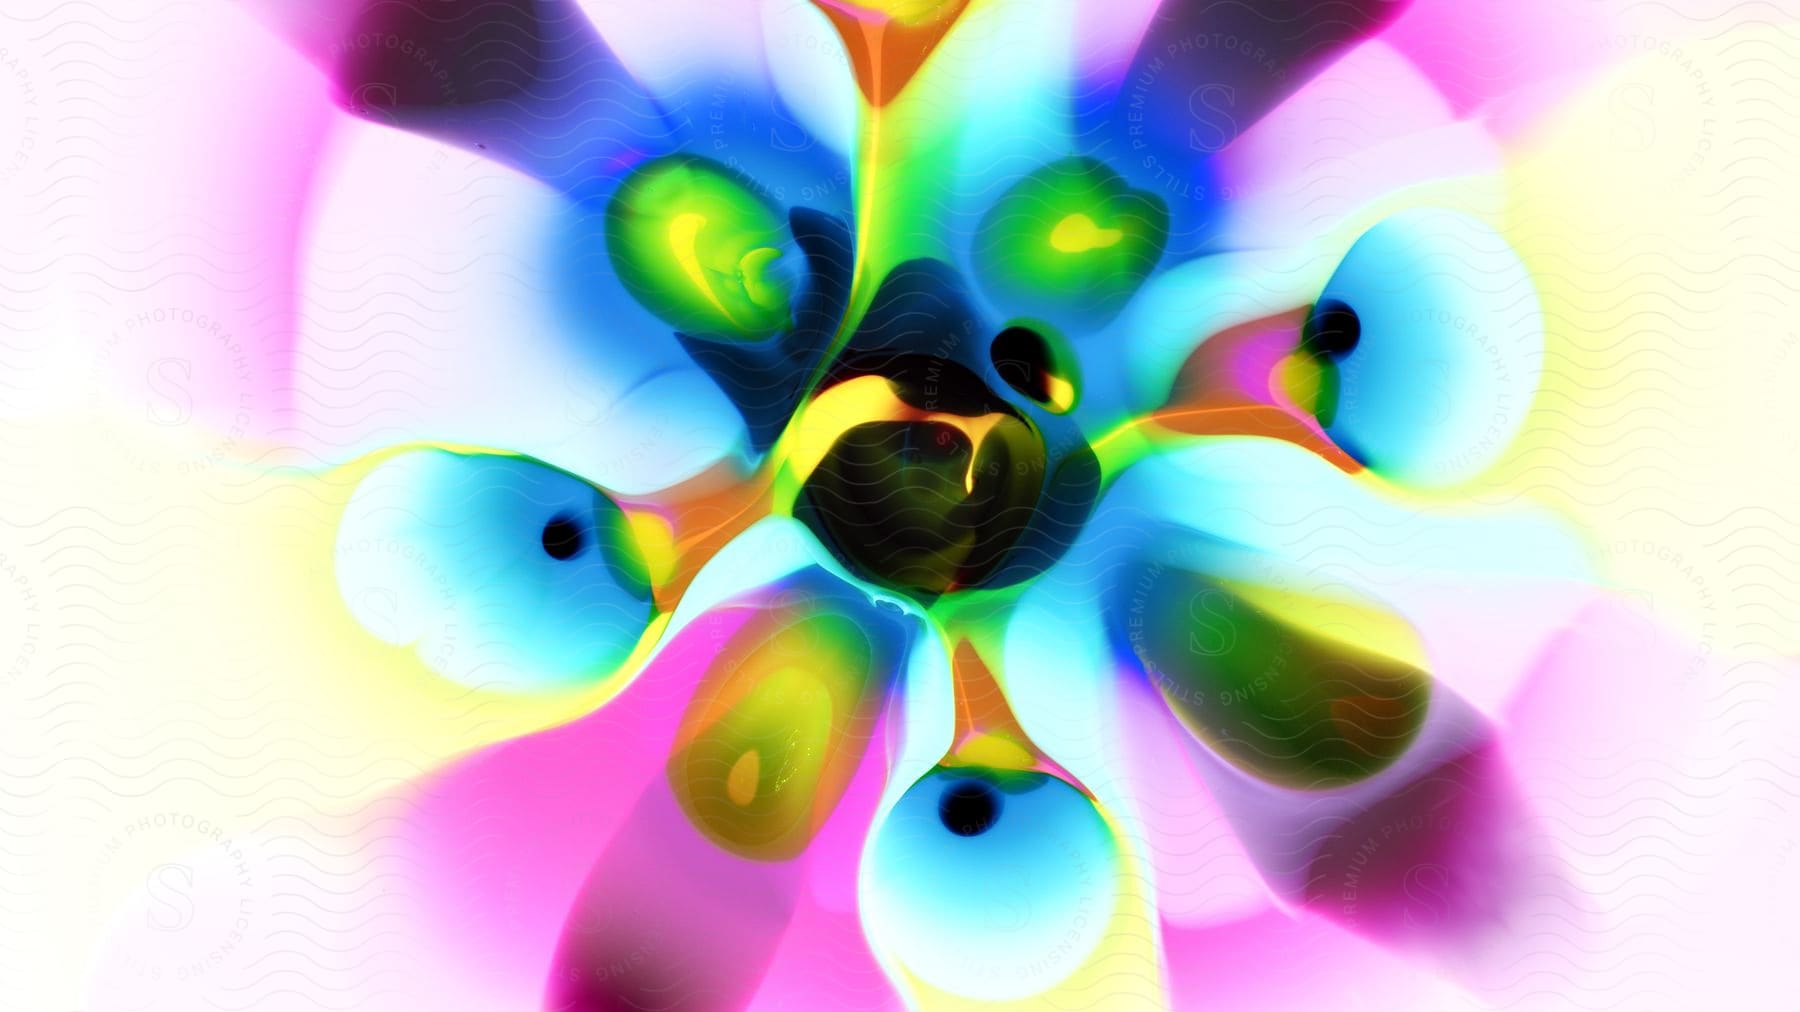 A colorful flower like pattern with a dark background.